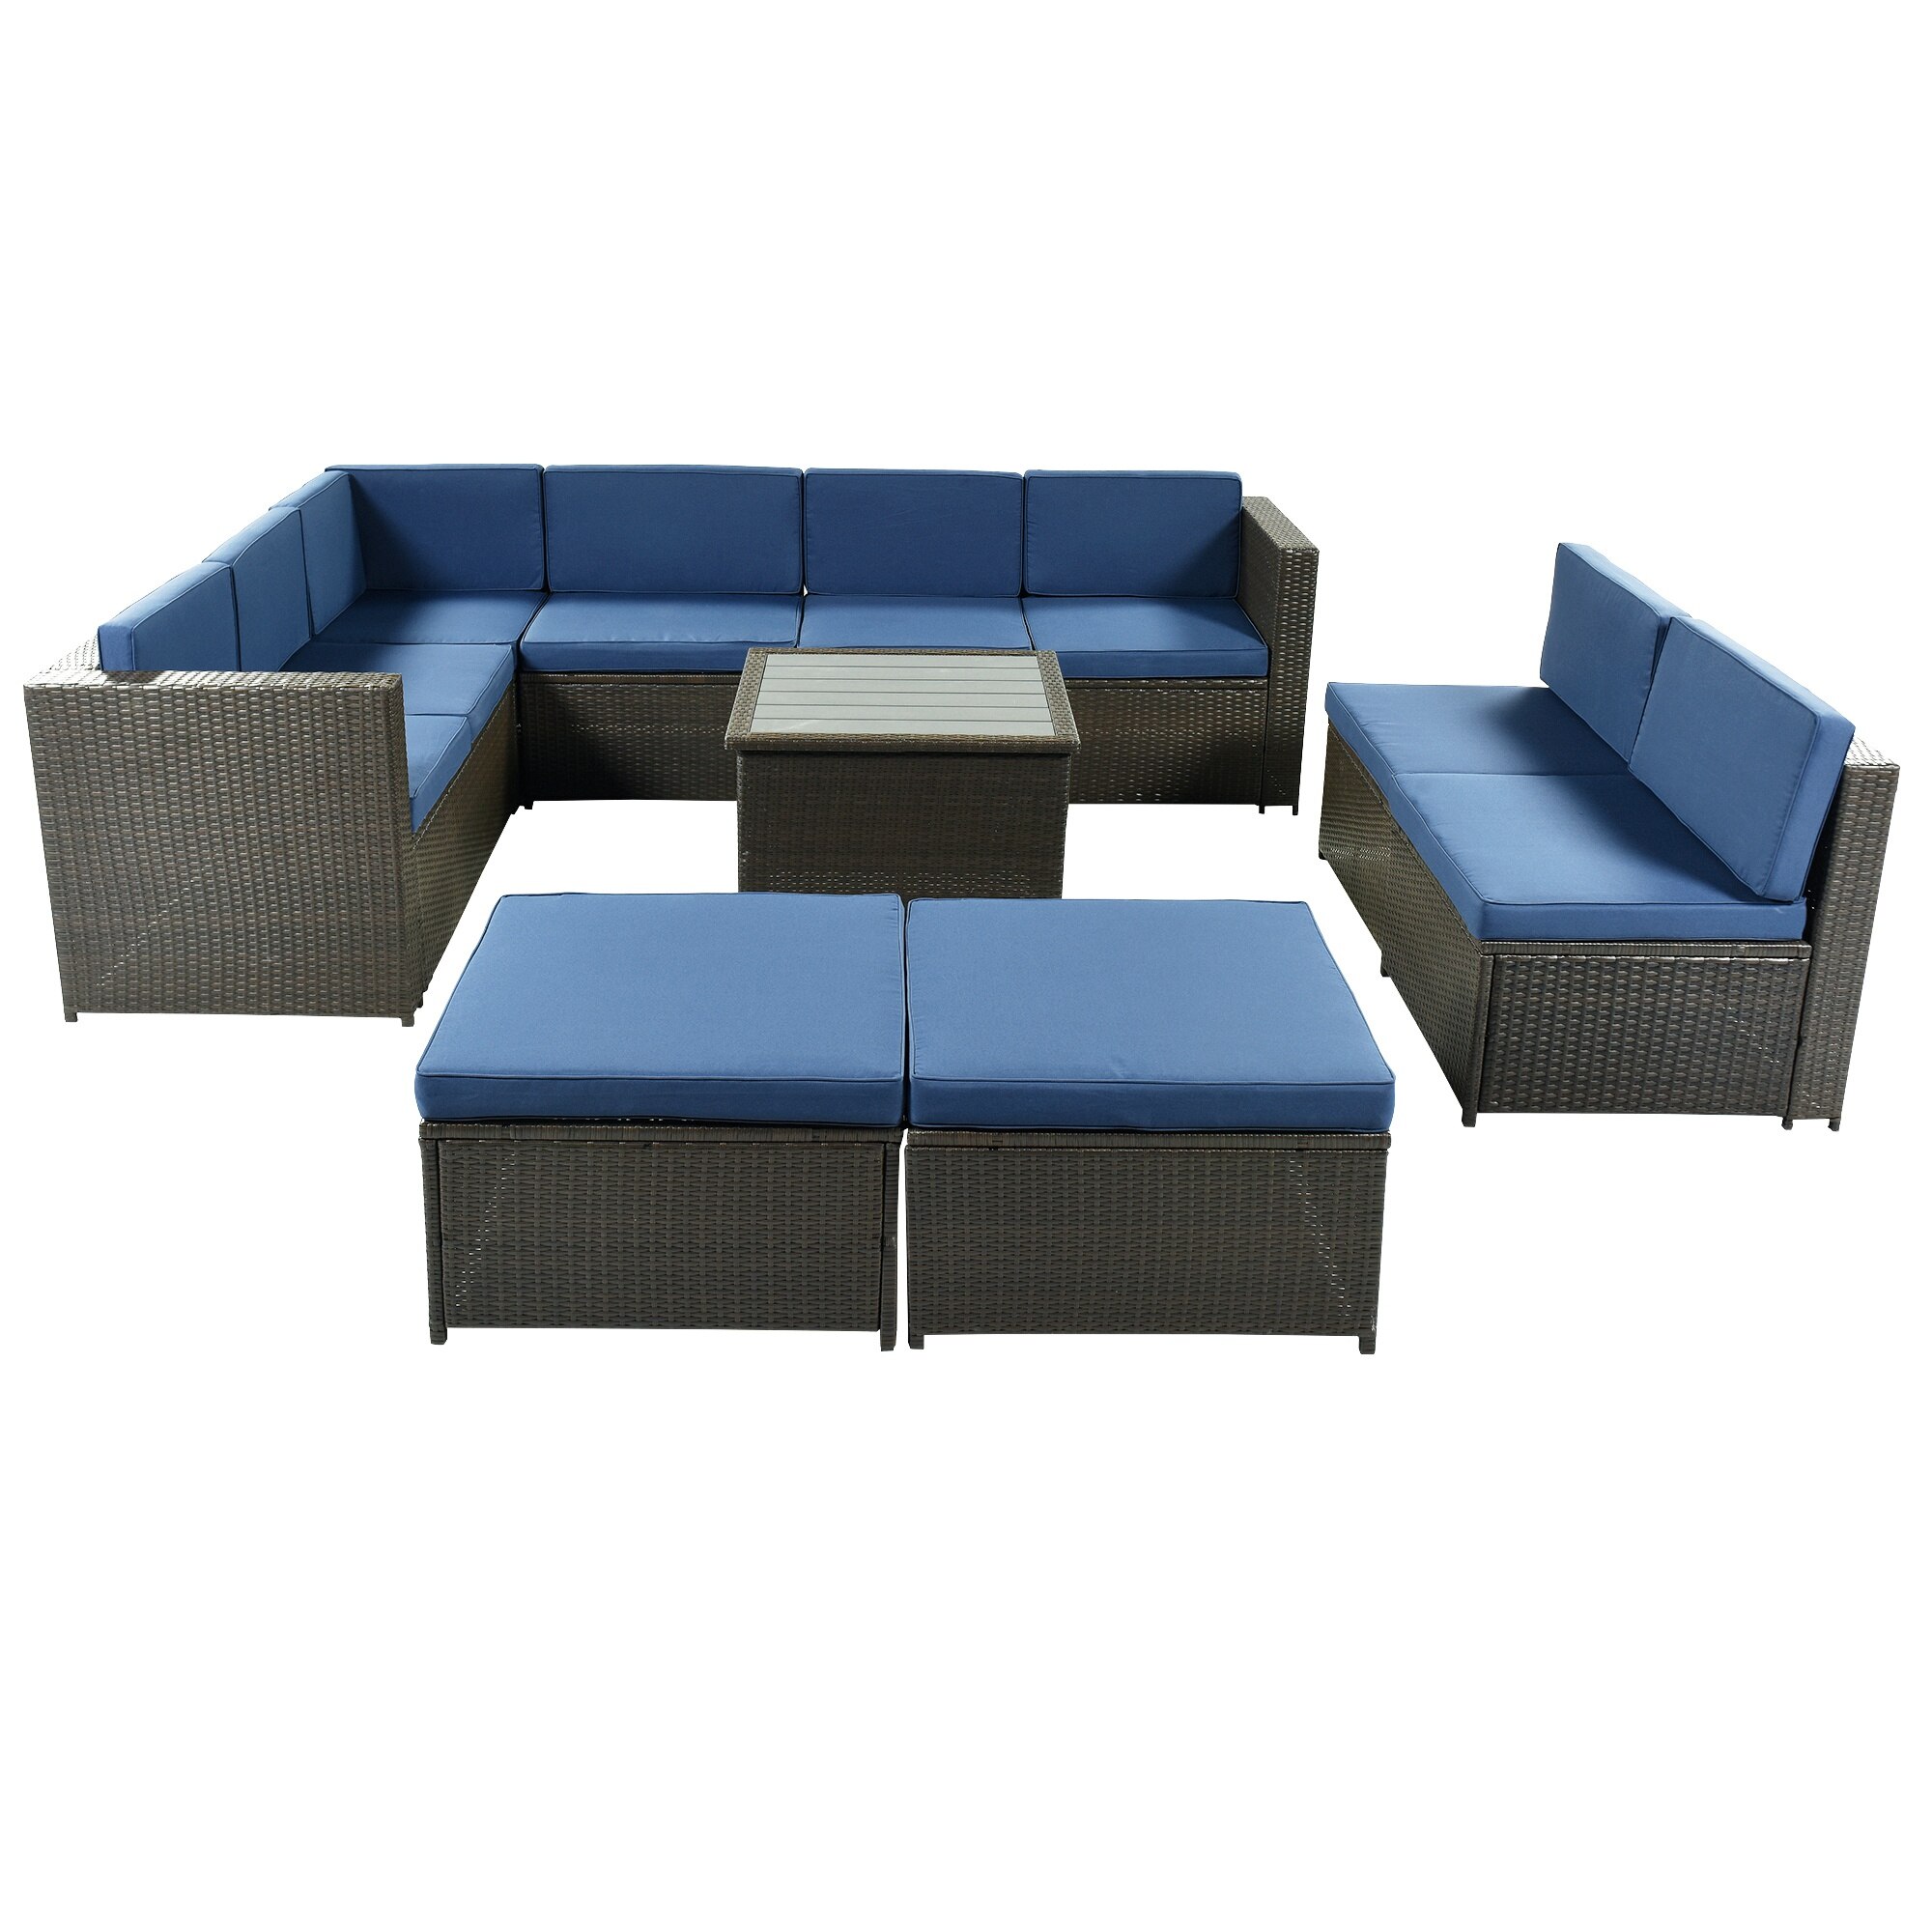 9 Piece Rattan Sectional Seating Group With Cushions And Ottoman Patio Furniture Sets Outdoor Wicker Sectional Garden Sofas 5